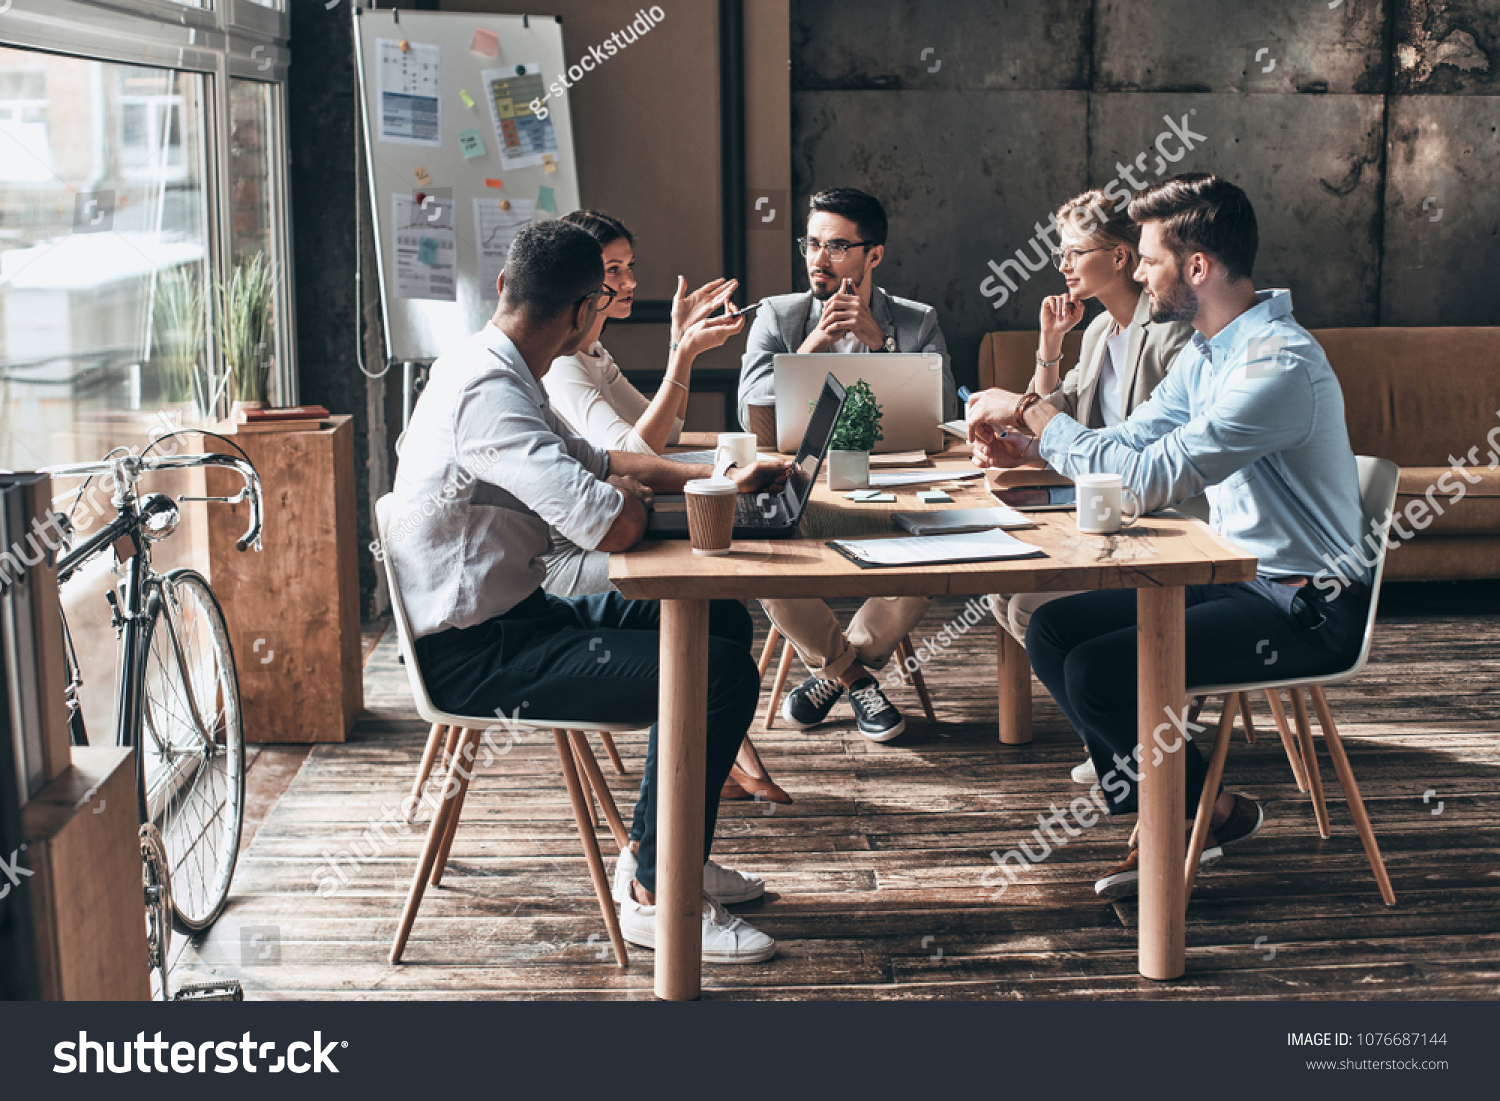 Confident and successful team. Group of young modern people in smart casual wear discussing business while sitting in the creative office #1076687144